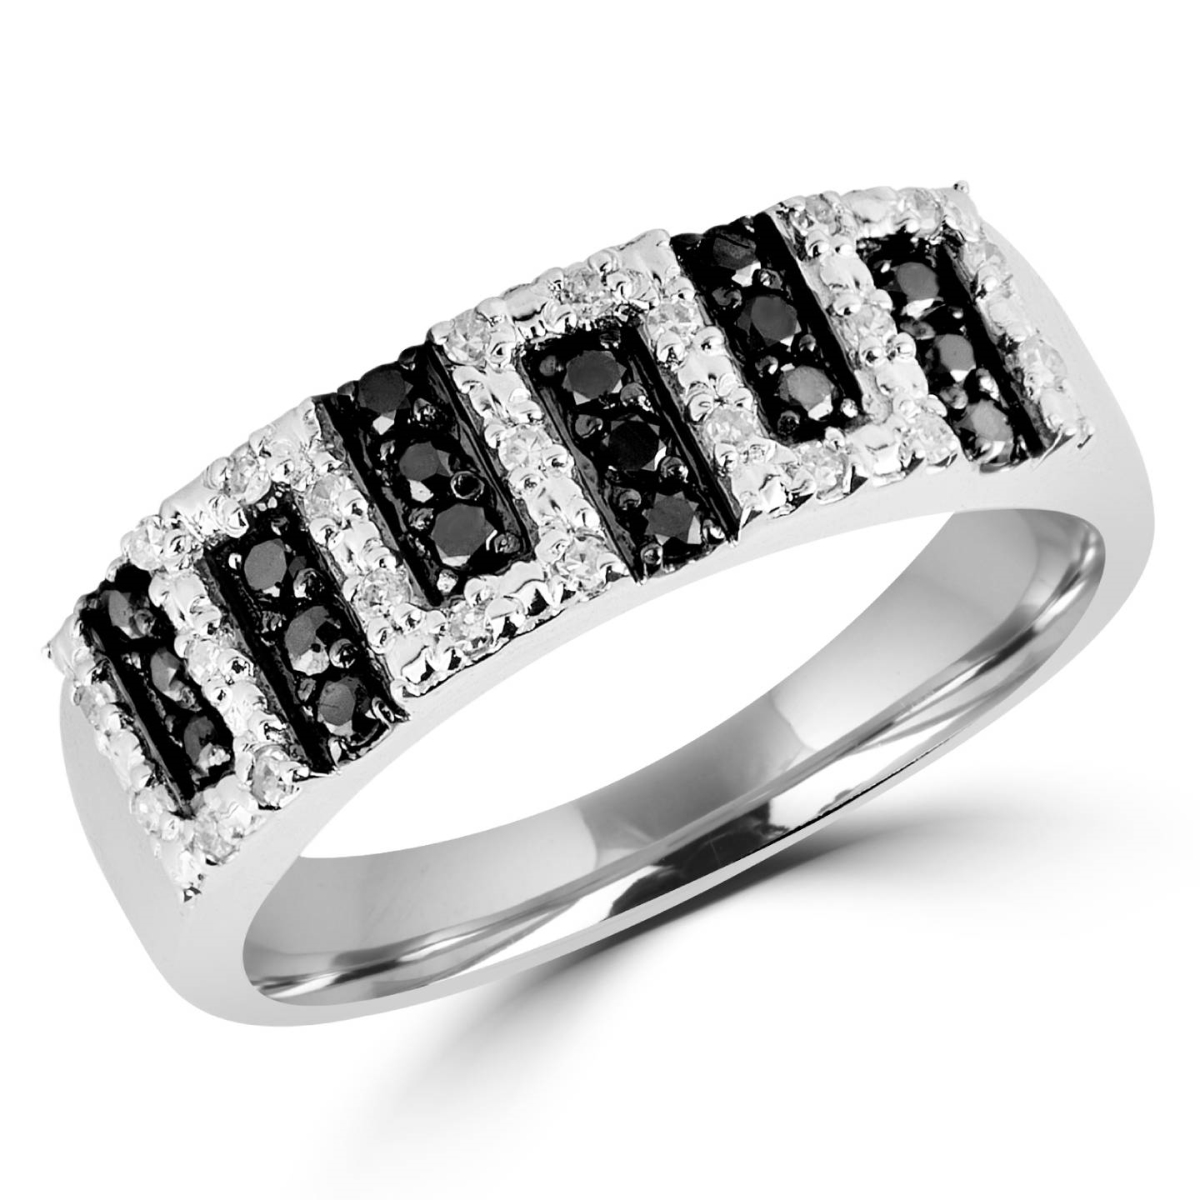 Picture of Majesty Diamonds MDR140087-3.25 0.25 CTW Black & White Diamond Fashion Cocktail Band Ring in 14K White Gold - Size 3.25